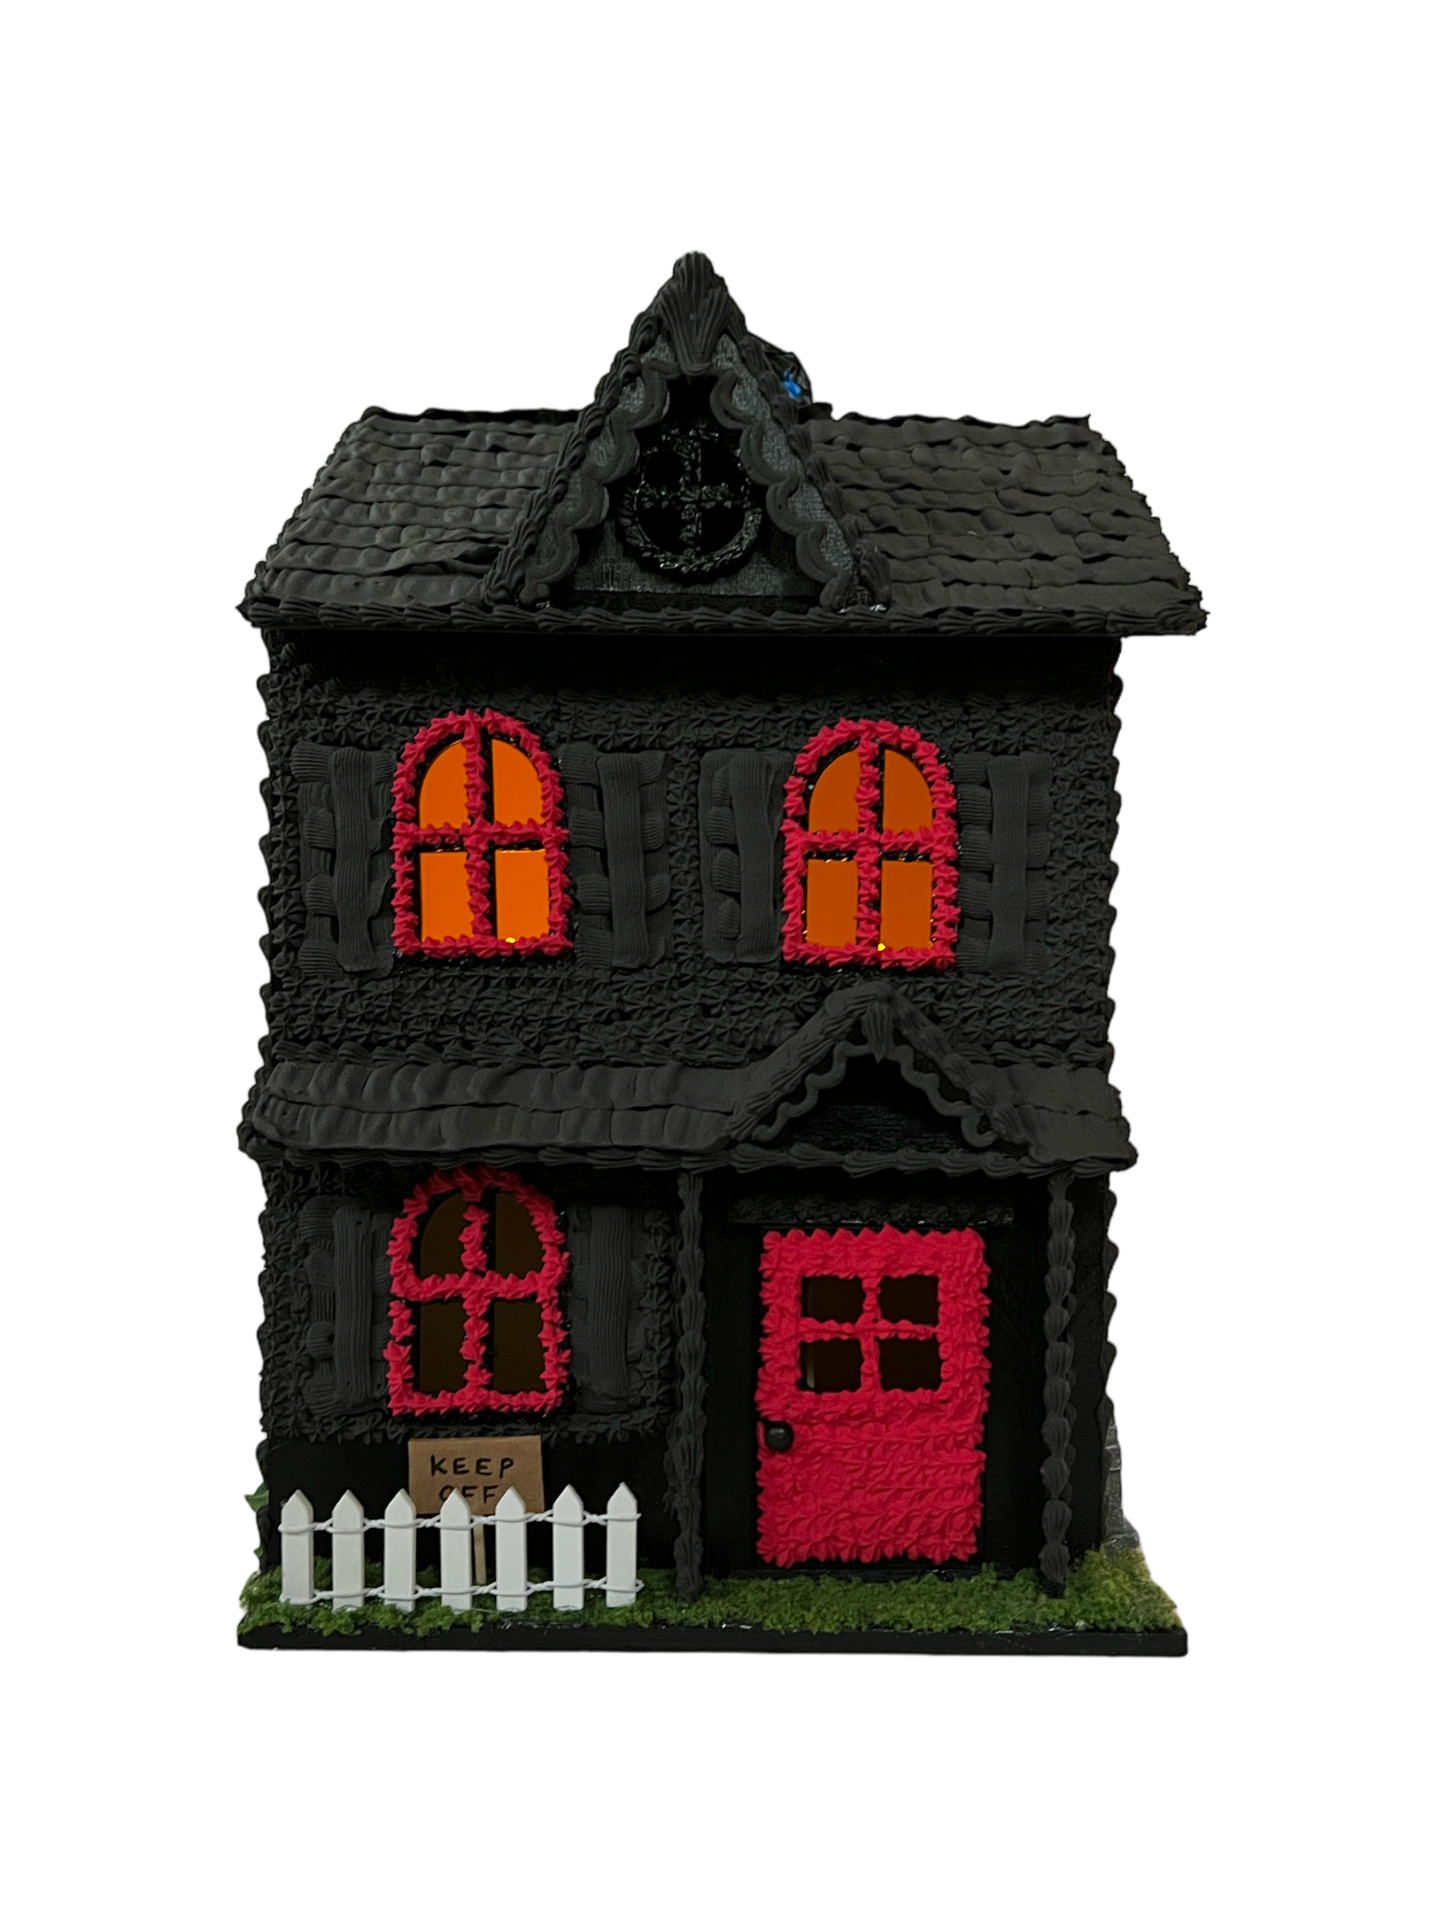 Haunted Doll House